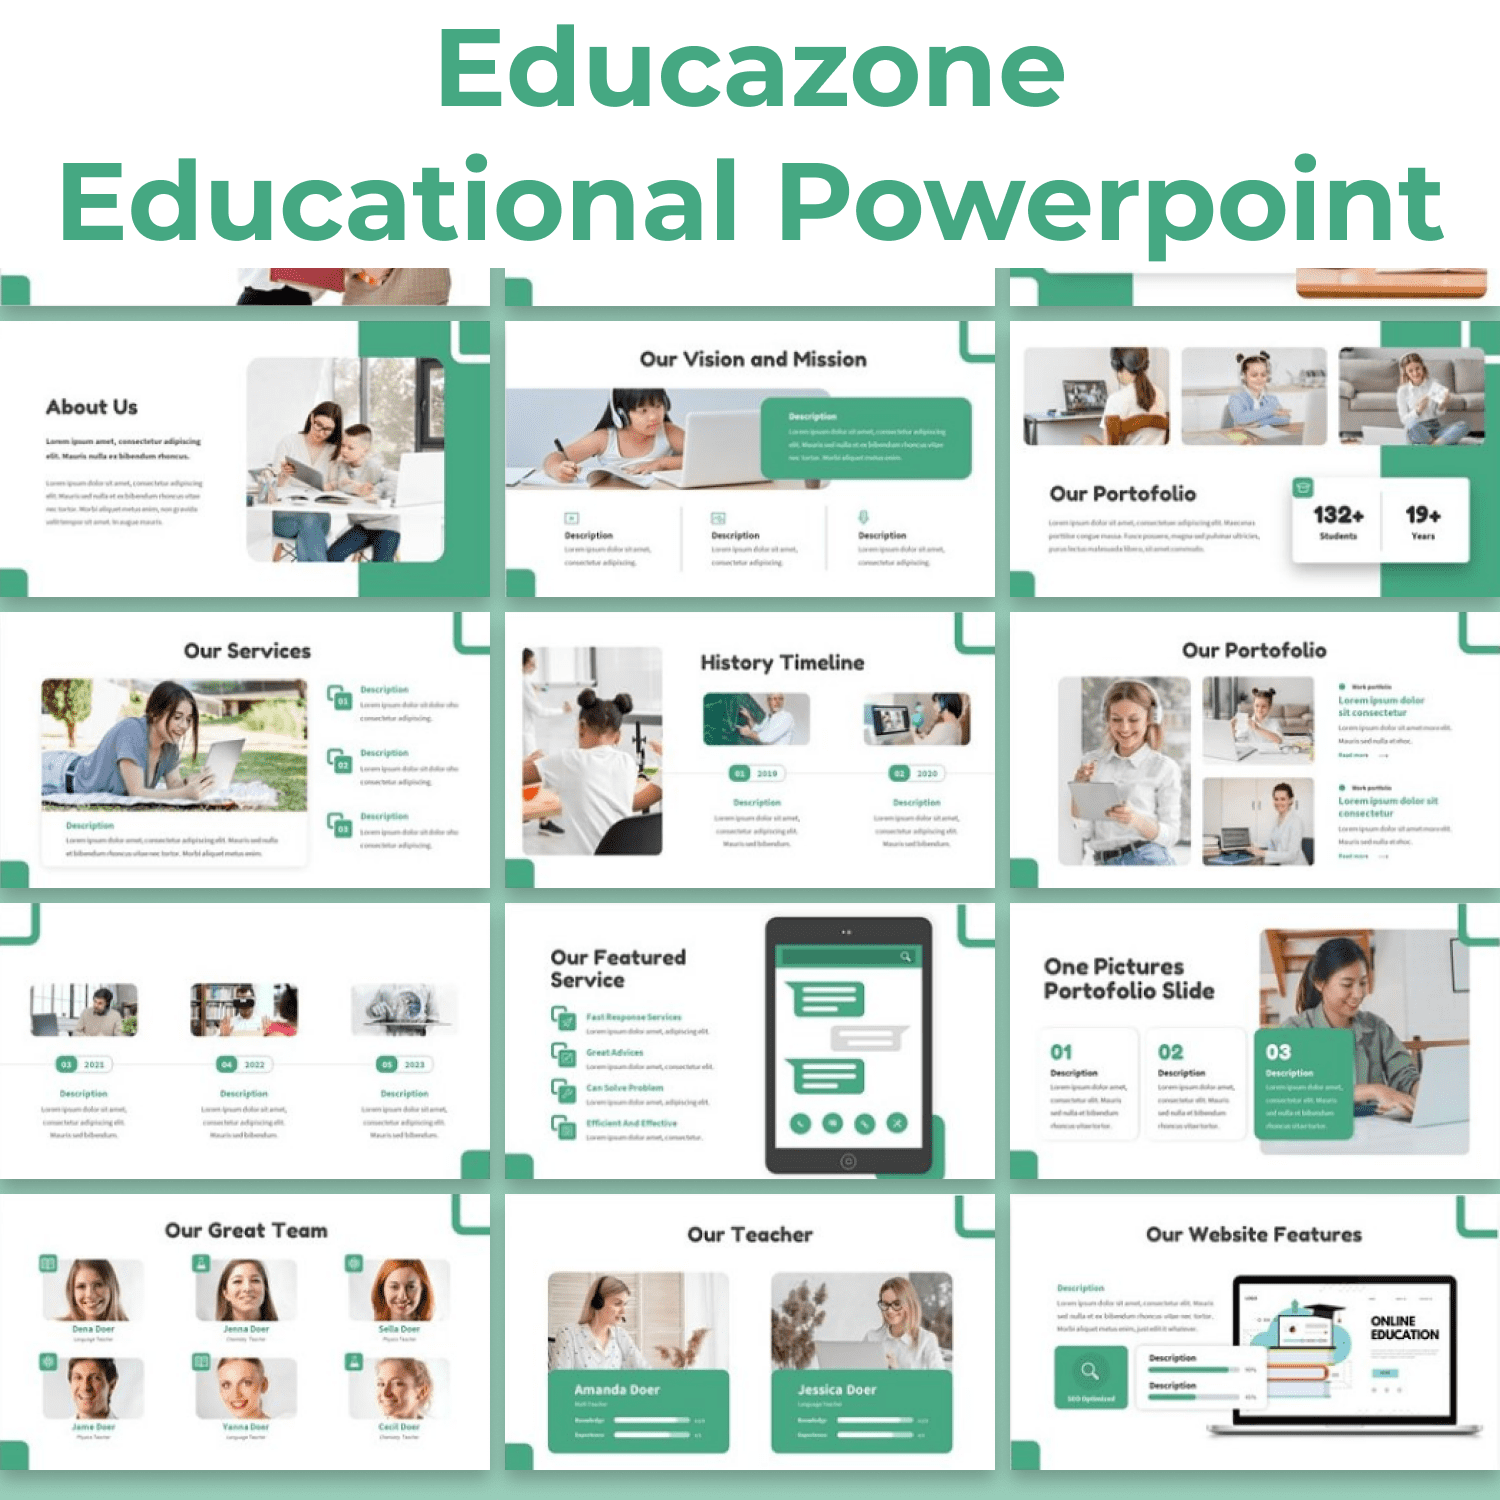 Educazone - Educational Powerpoint cover image.